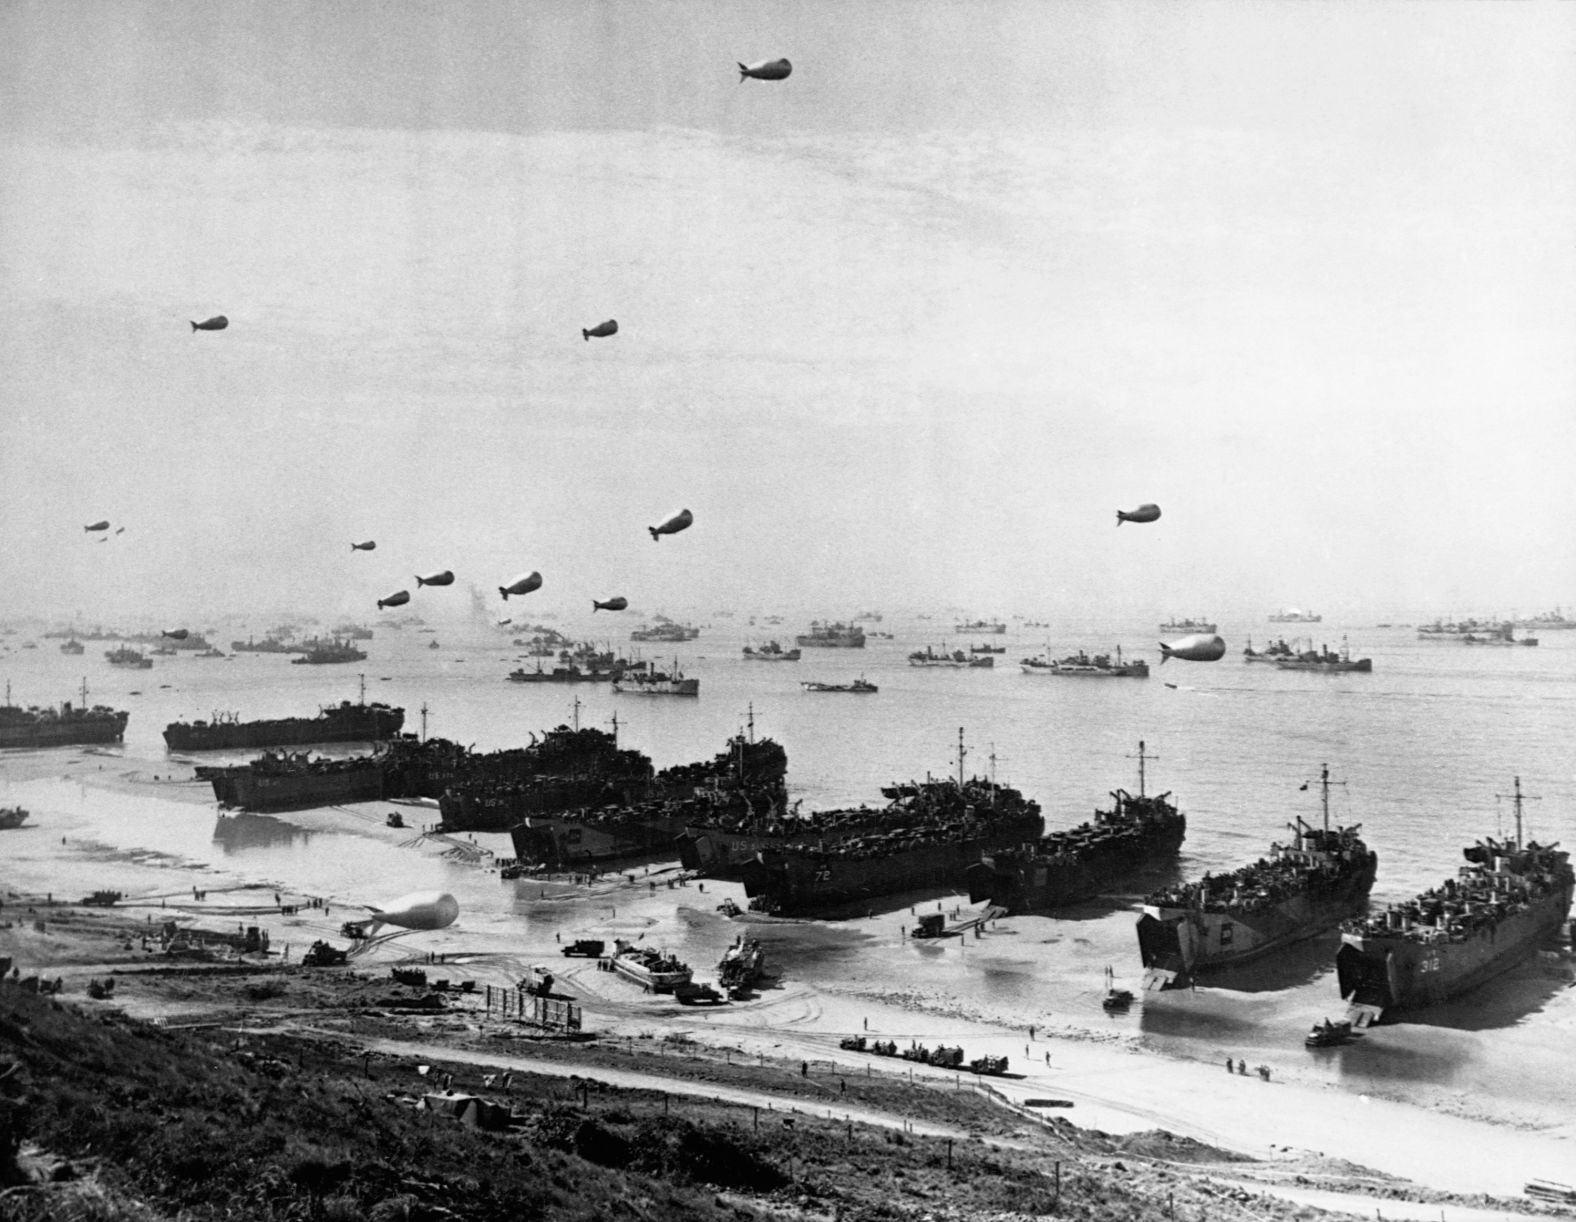 Landing craft and a fleet of protection vessels approach Omaha Beach. By midnight, the troops had secured their beachheads and moved further inland.